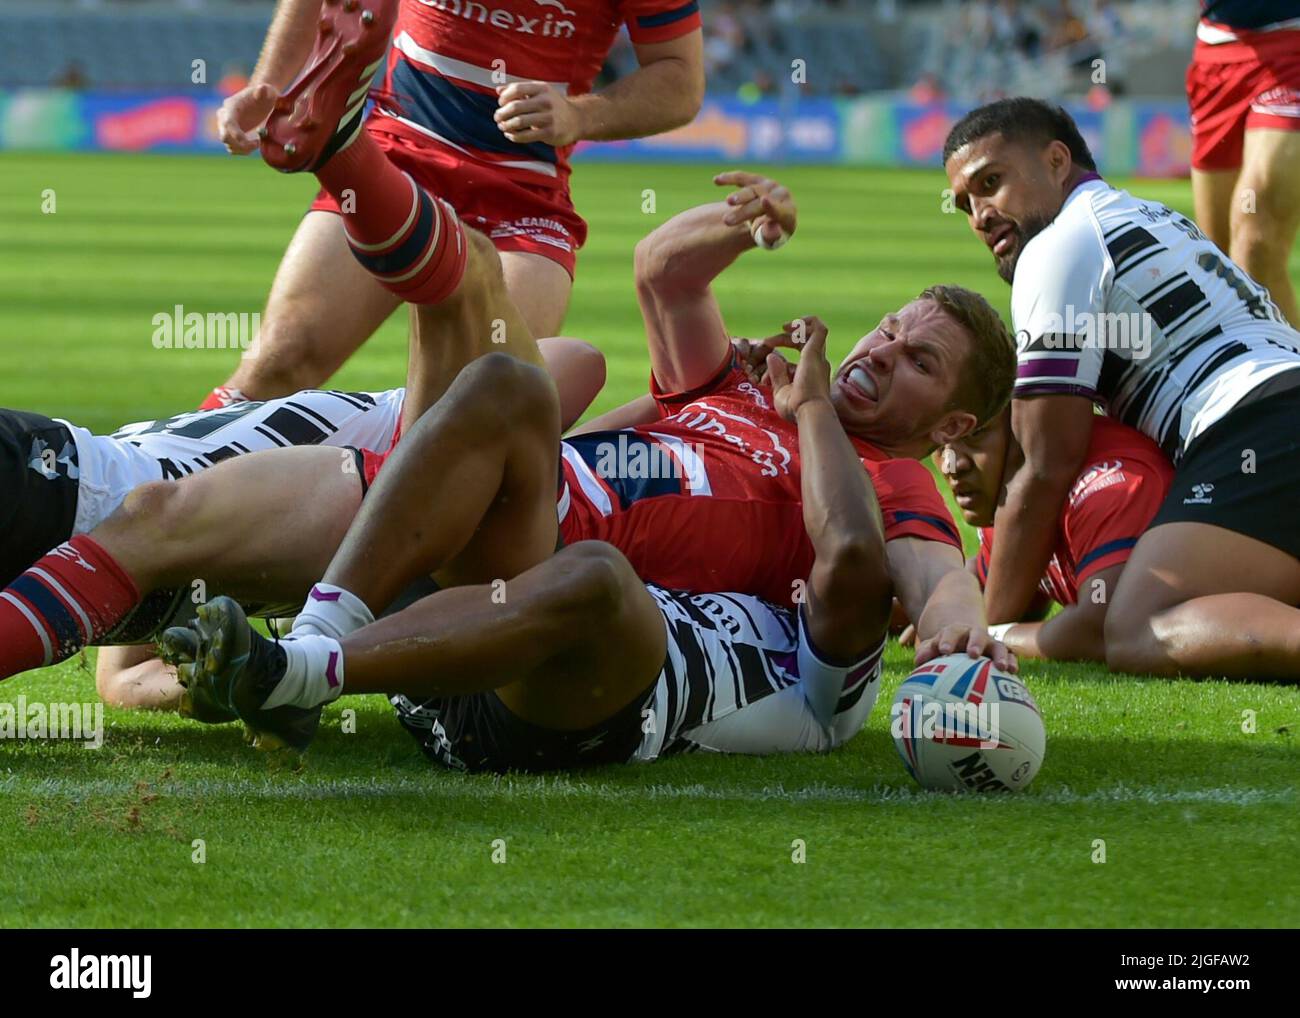 Newcastle, UK. 10th July, 2022. Matt Parcell of Hull KR scores a try  Hull KR v Hull FC  Event: Magic Weekend 2022 Venue: St James Park, Newcastle, UK Date: 10th July 2022 Credit: Craig Cresswell/Alamy Live News Stock Photo